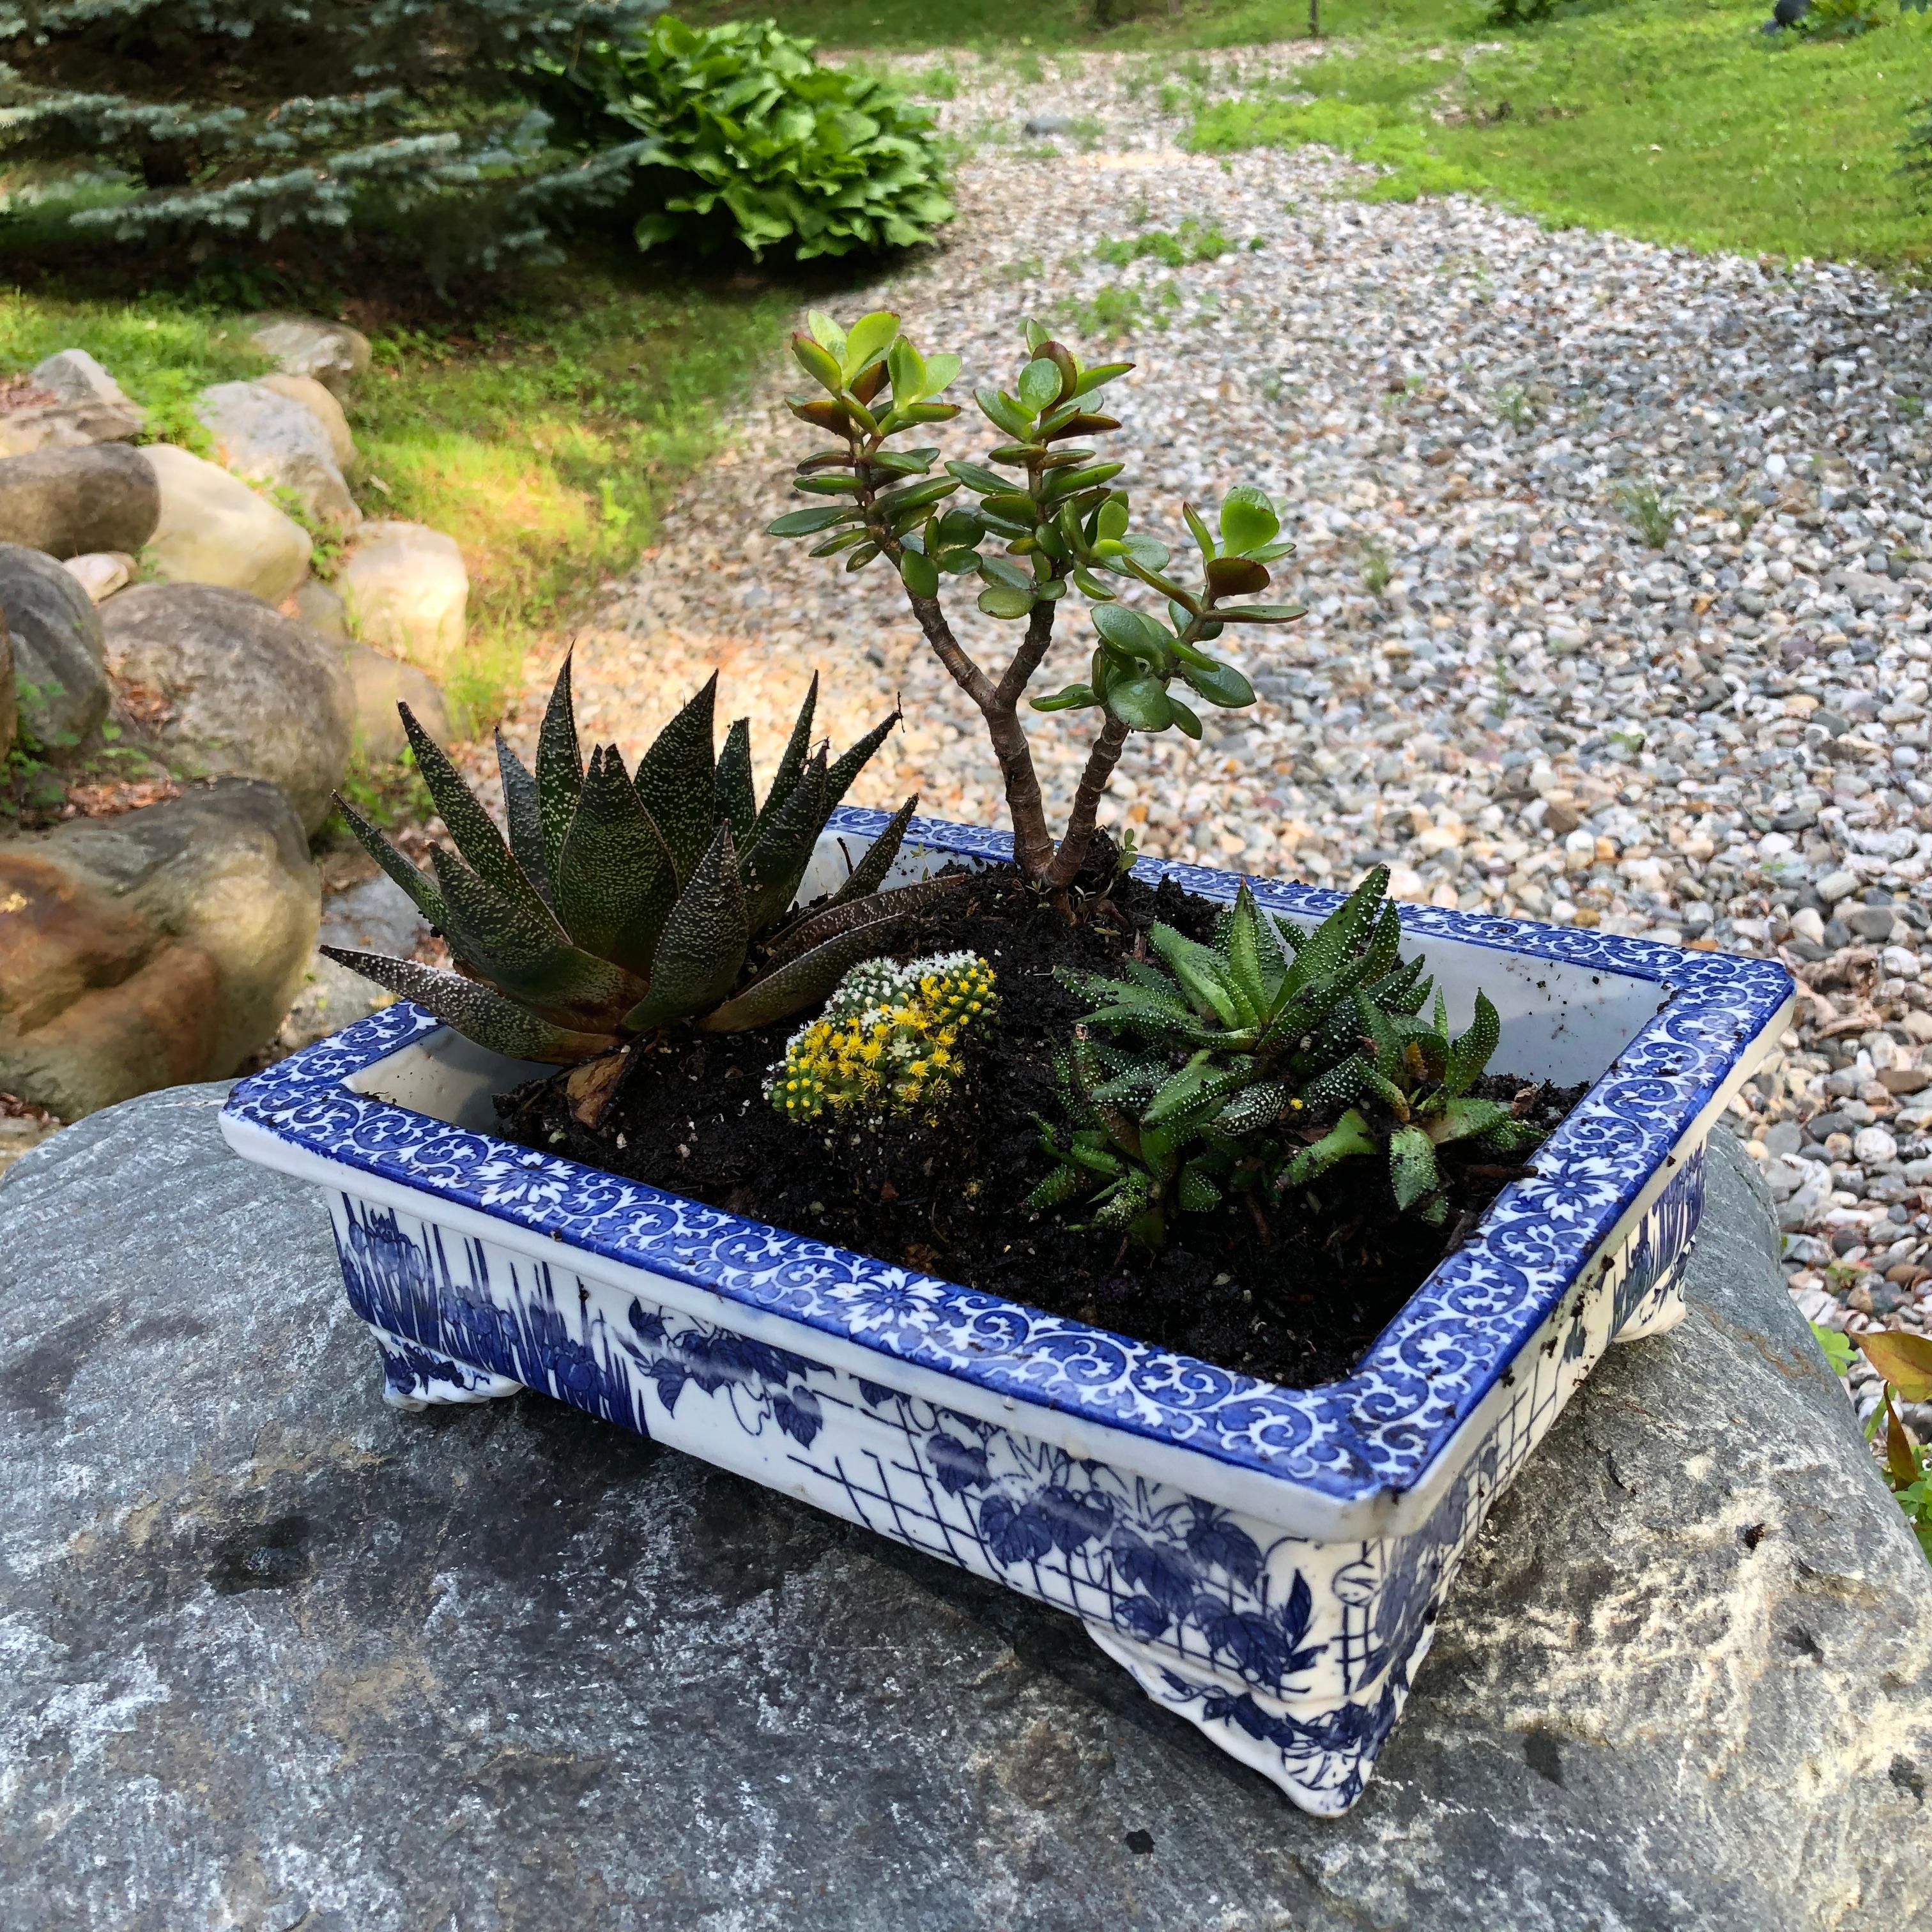 Here's a beautiful and unique way to accent your indoor gallery or private collection space with this very unusual treasure from Japan! 

This is a hard to find blue and white painted ceramic rectangular planter for ikebana, flowers, or bonsai. It